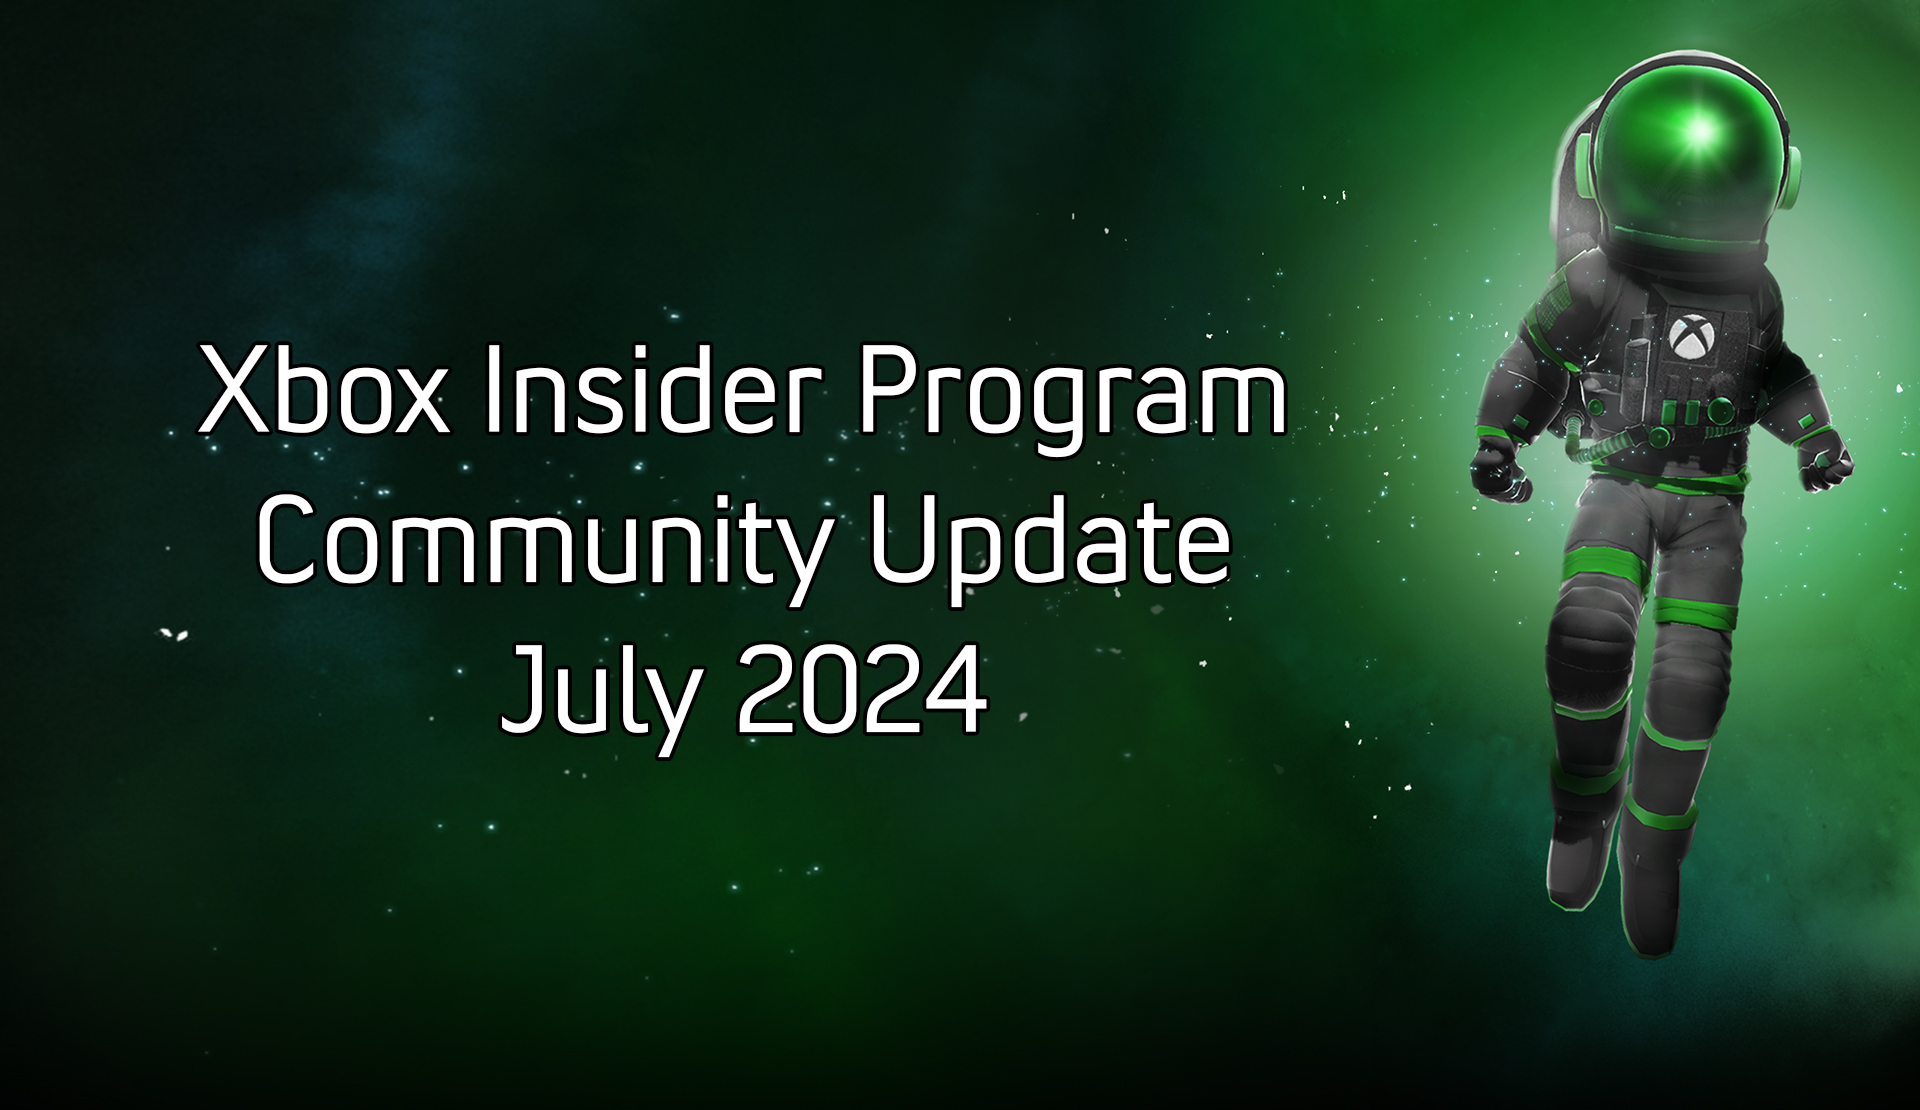 Community Update July 2024 – Summertime Edition